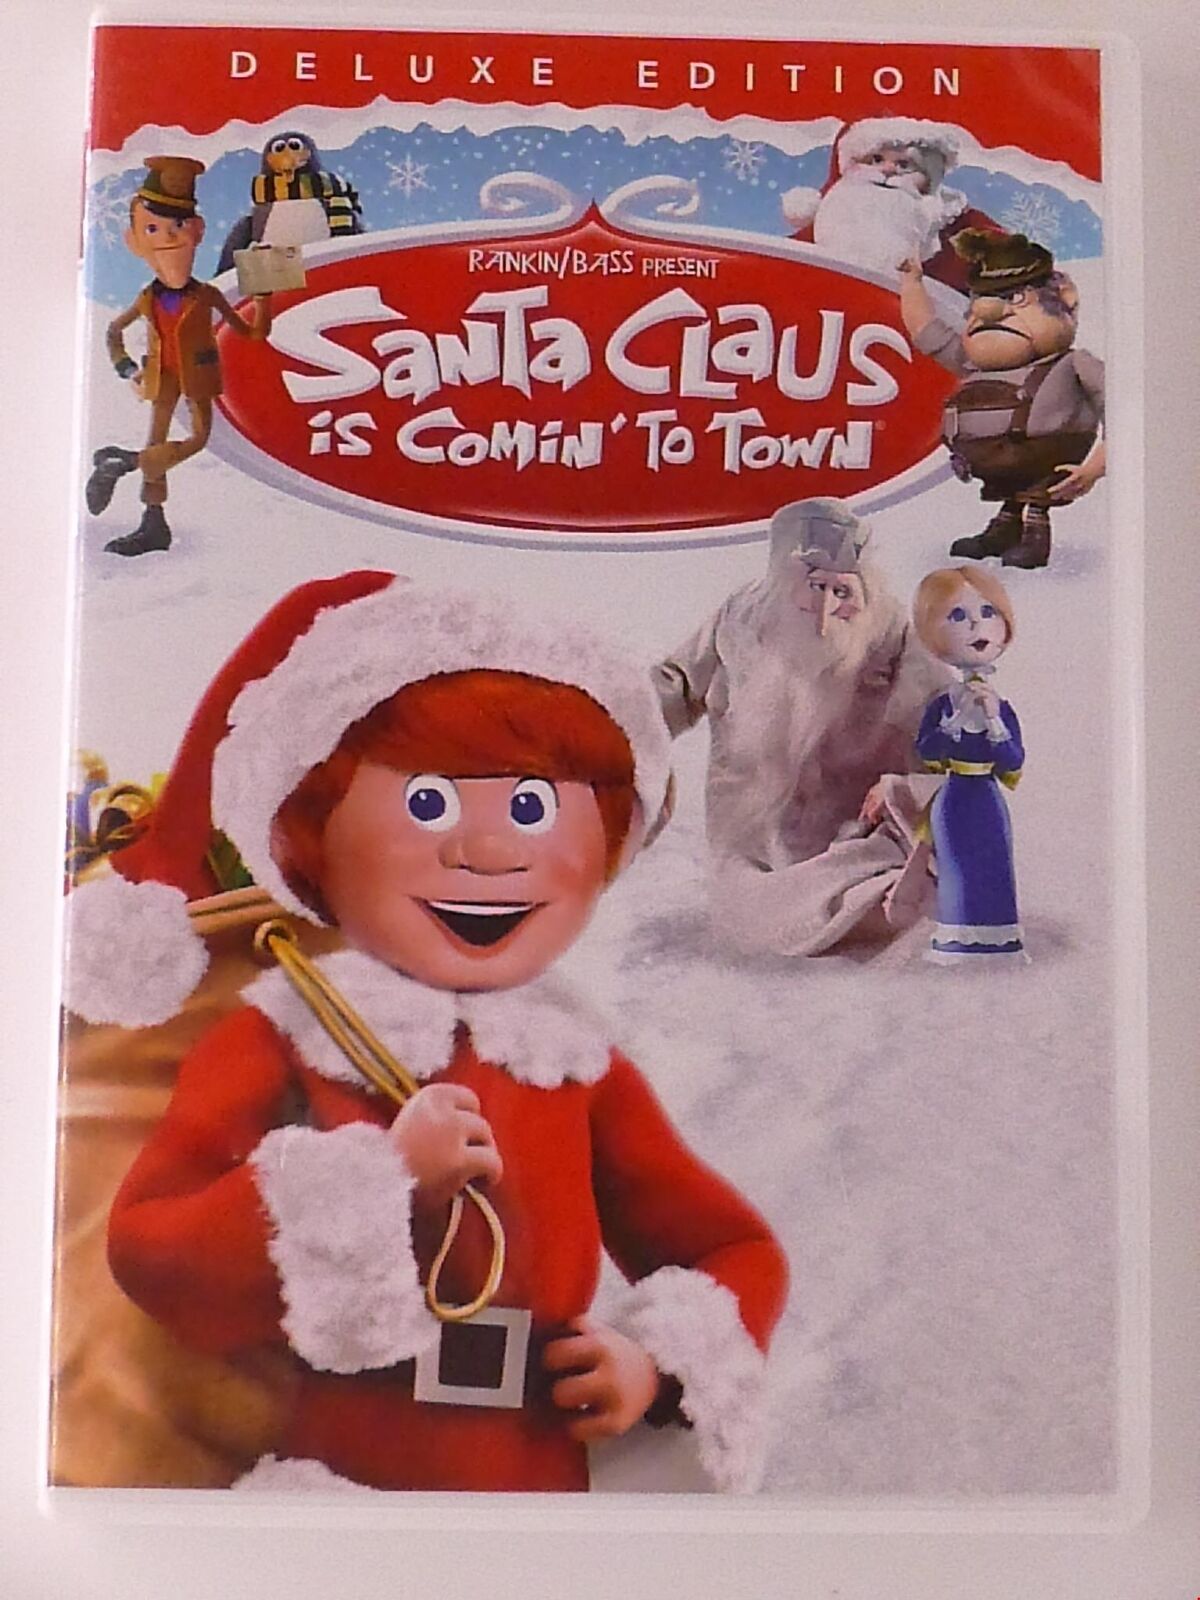 Santa Claus is Comin to Town (DVD, Deluxe Edition, 1970) - I0911